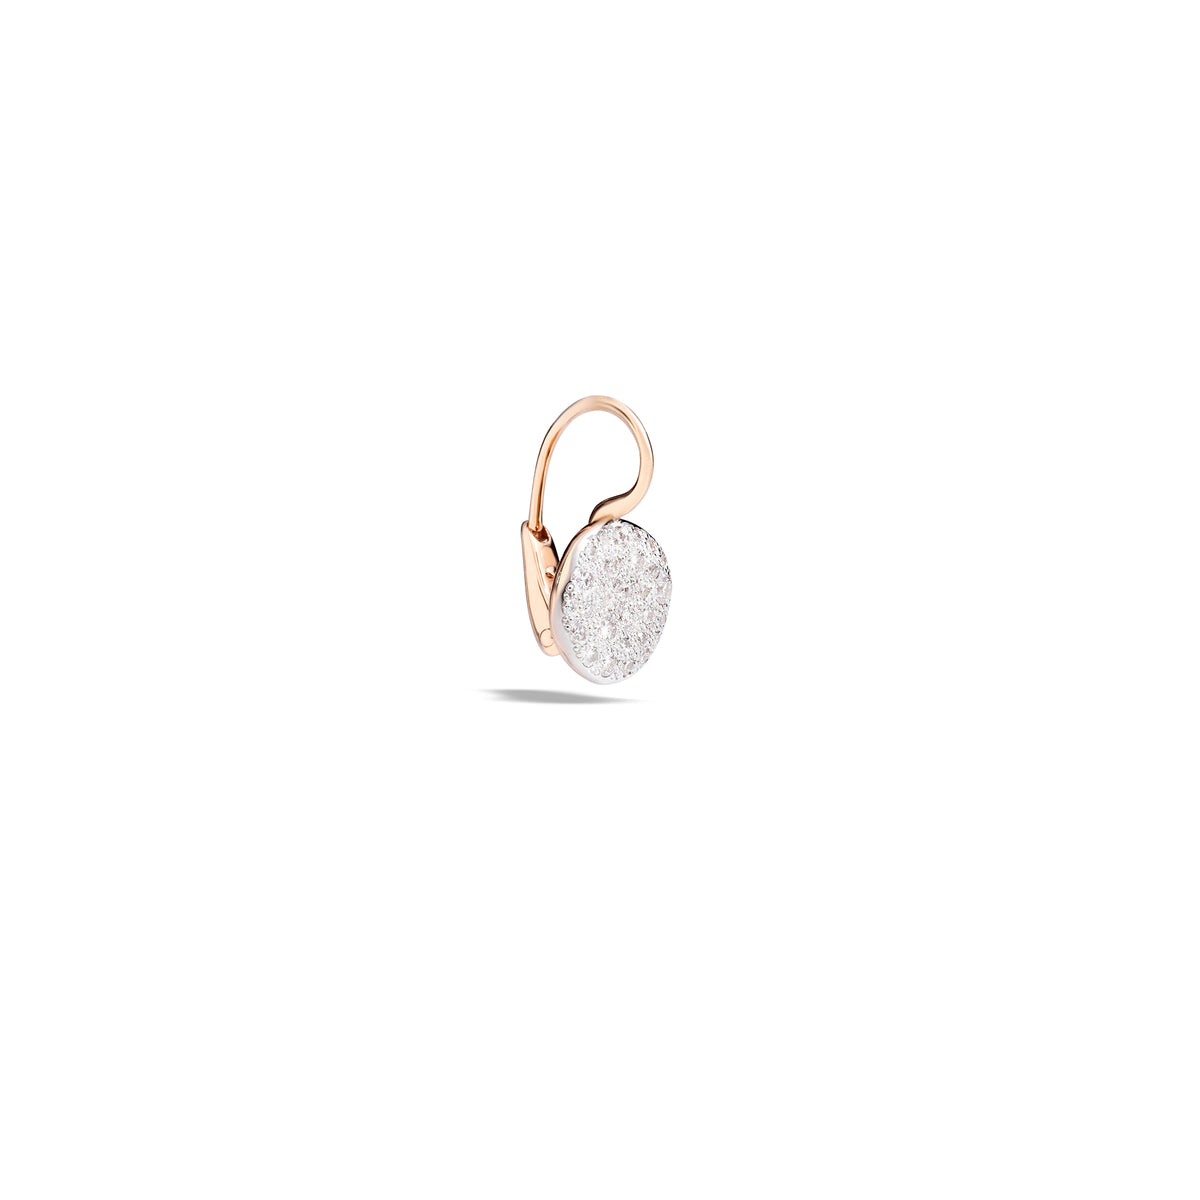 Sabbia Earrings in 18k Rose Gold with Pave Diamonds - Orsini Jewellers NZ